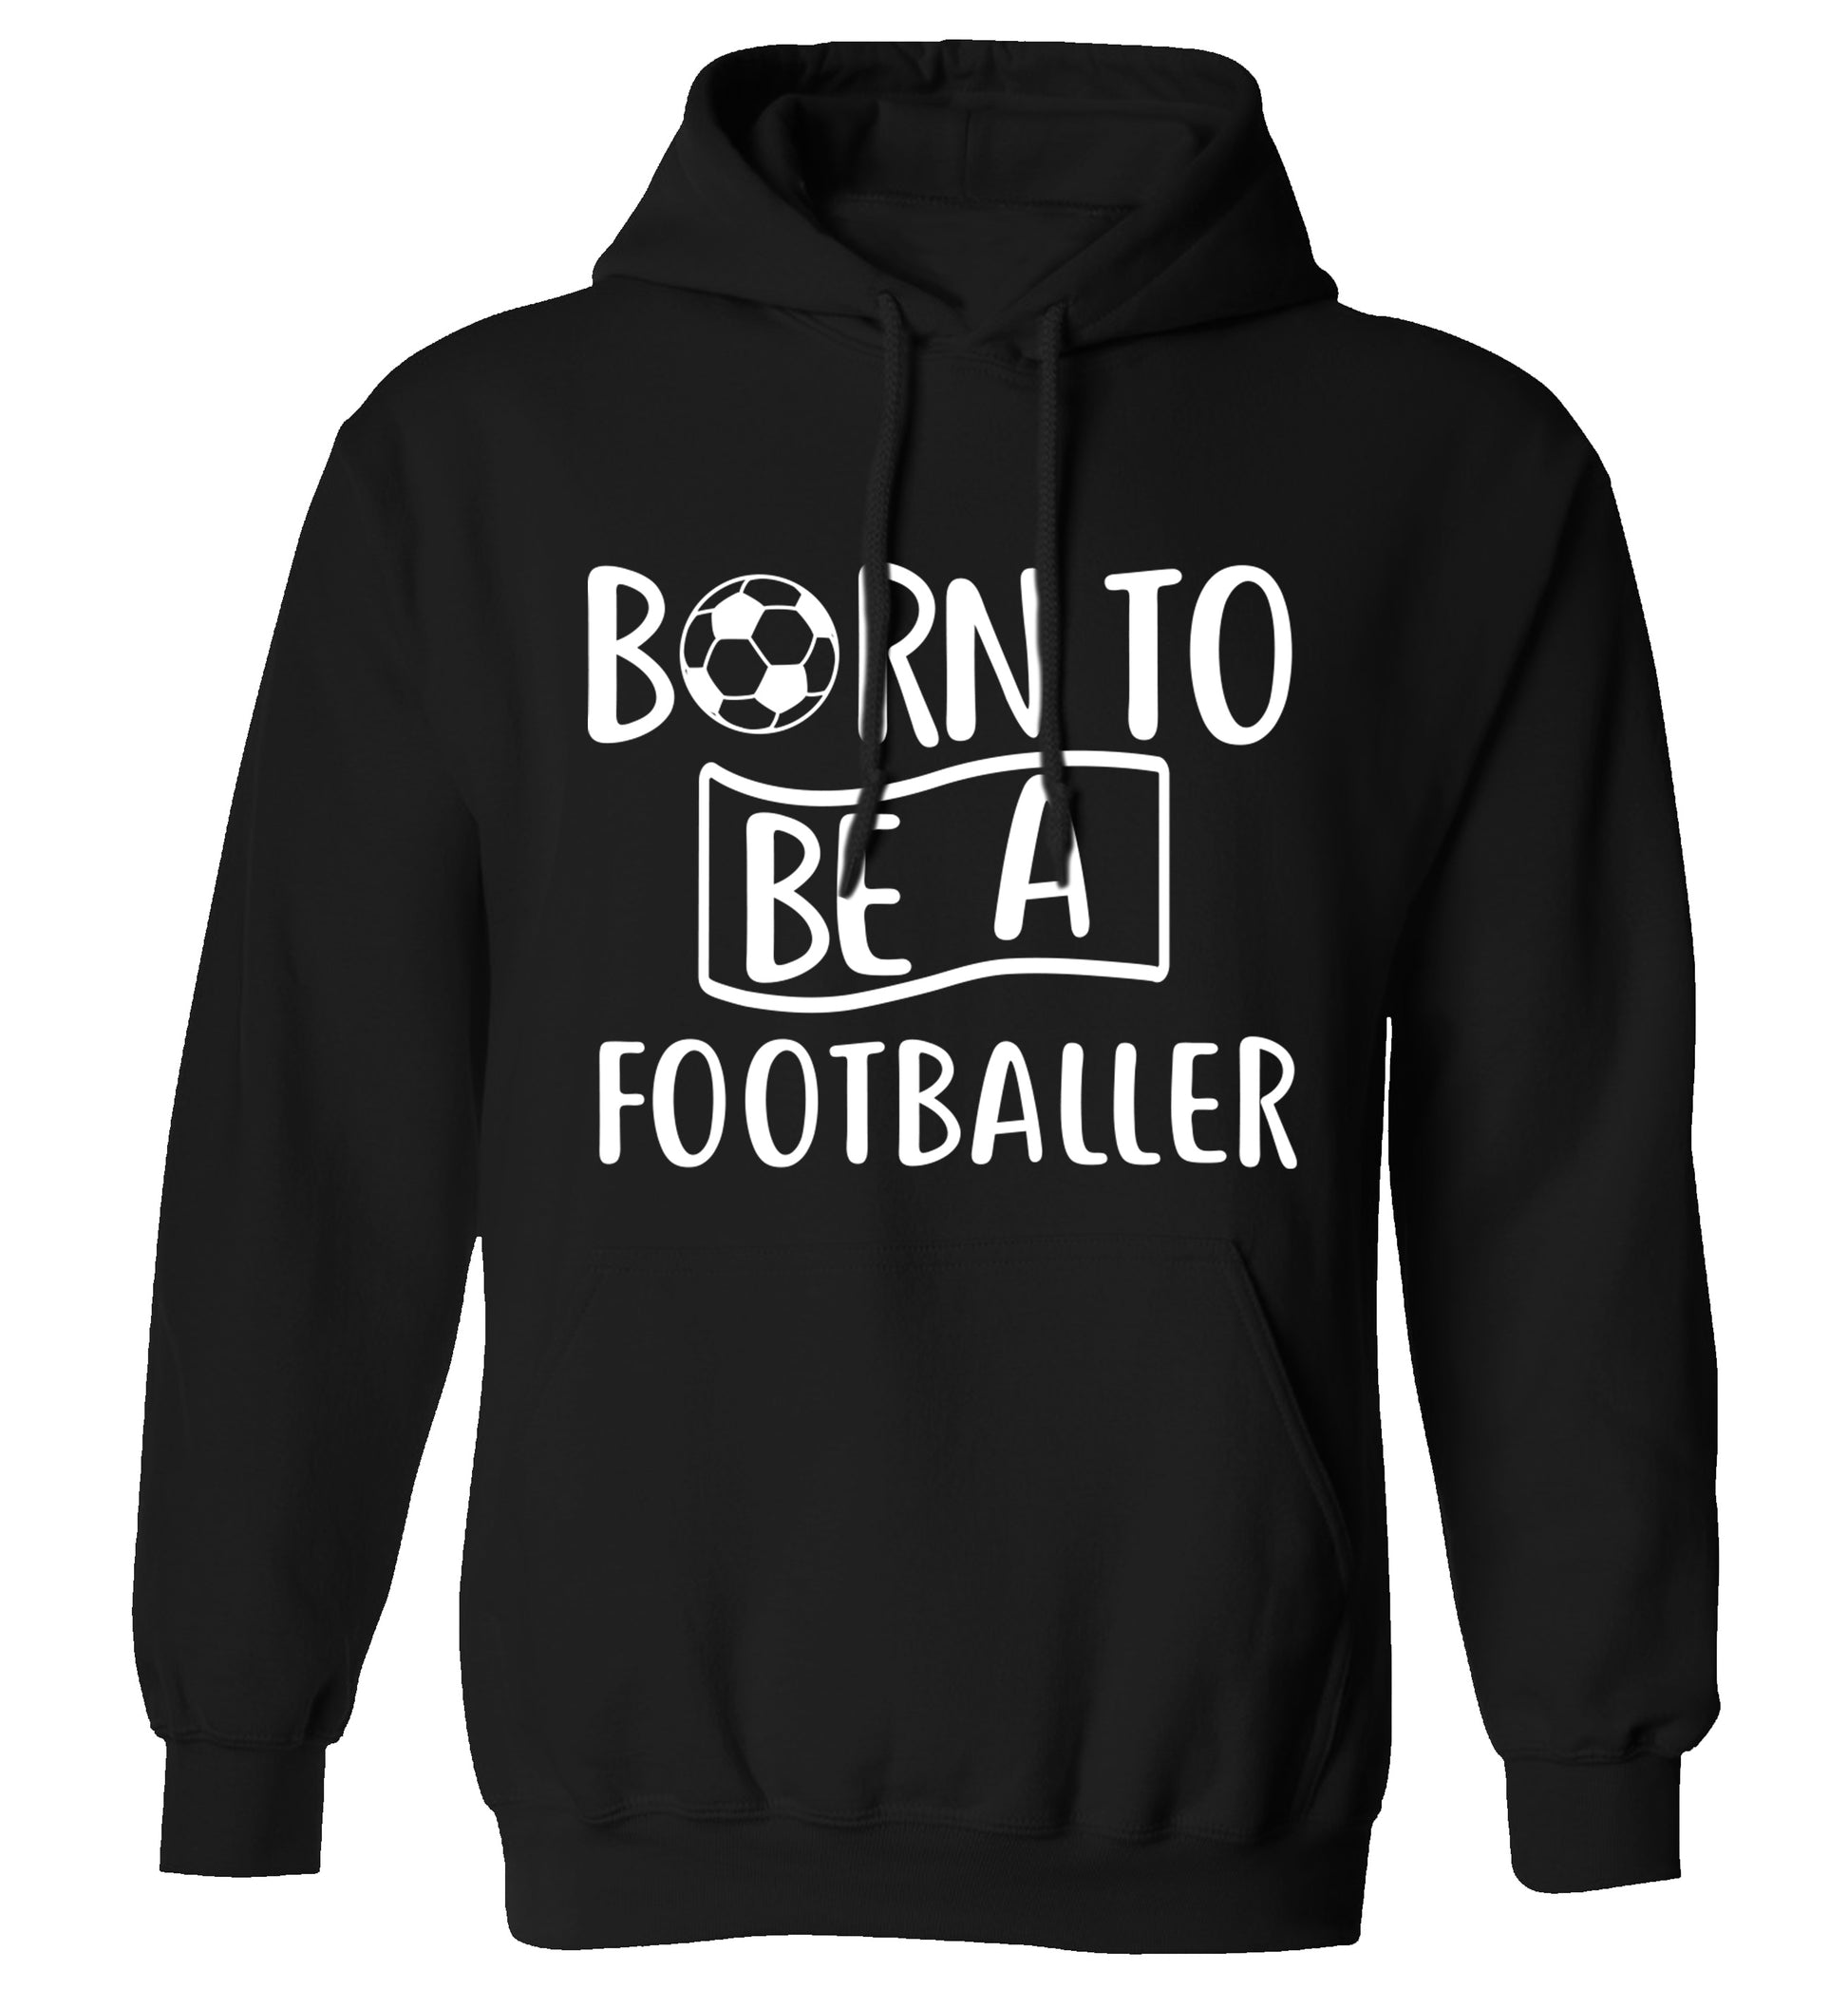 Born to be a footballer adults unisexblack hoodie 2XL